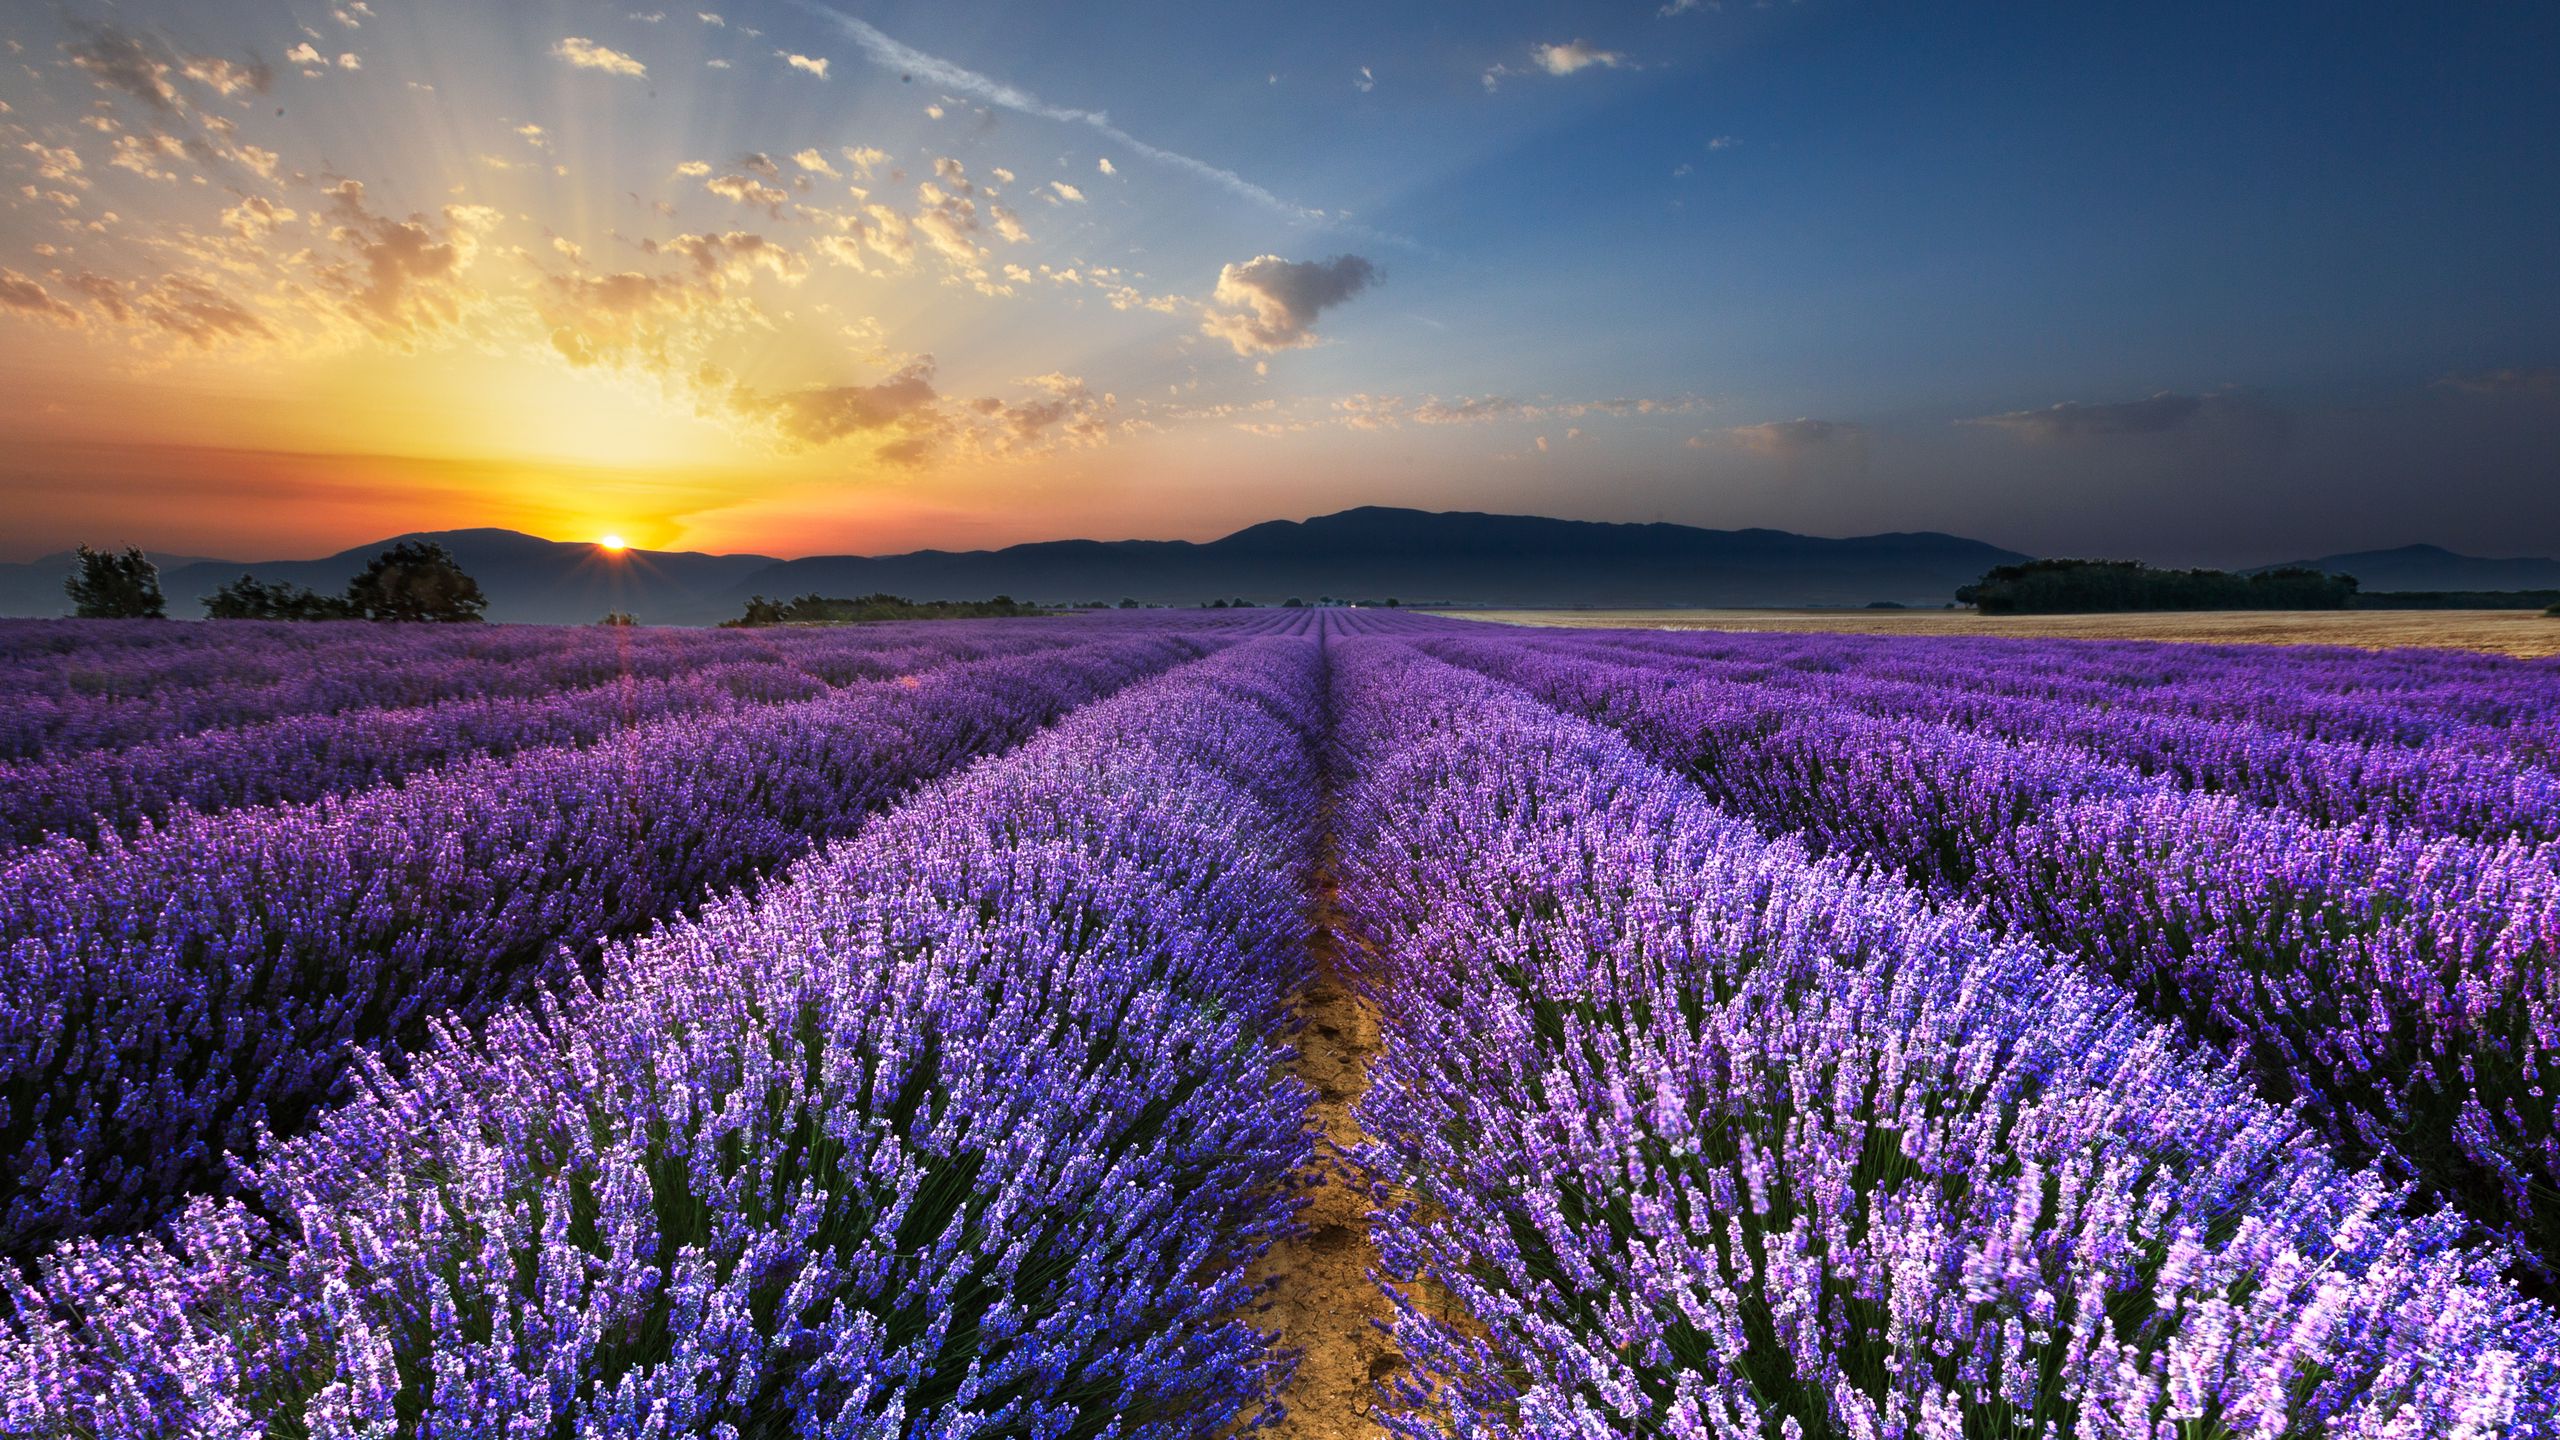 Wallpaper Lavender field flowers trees sunset 1920x1200 HD Picture Image